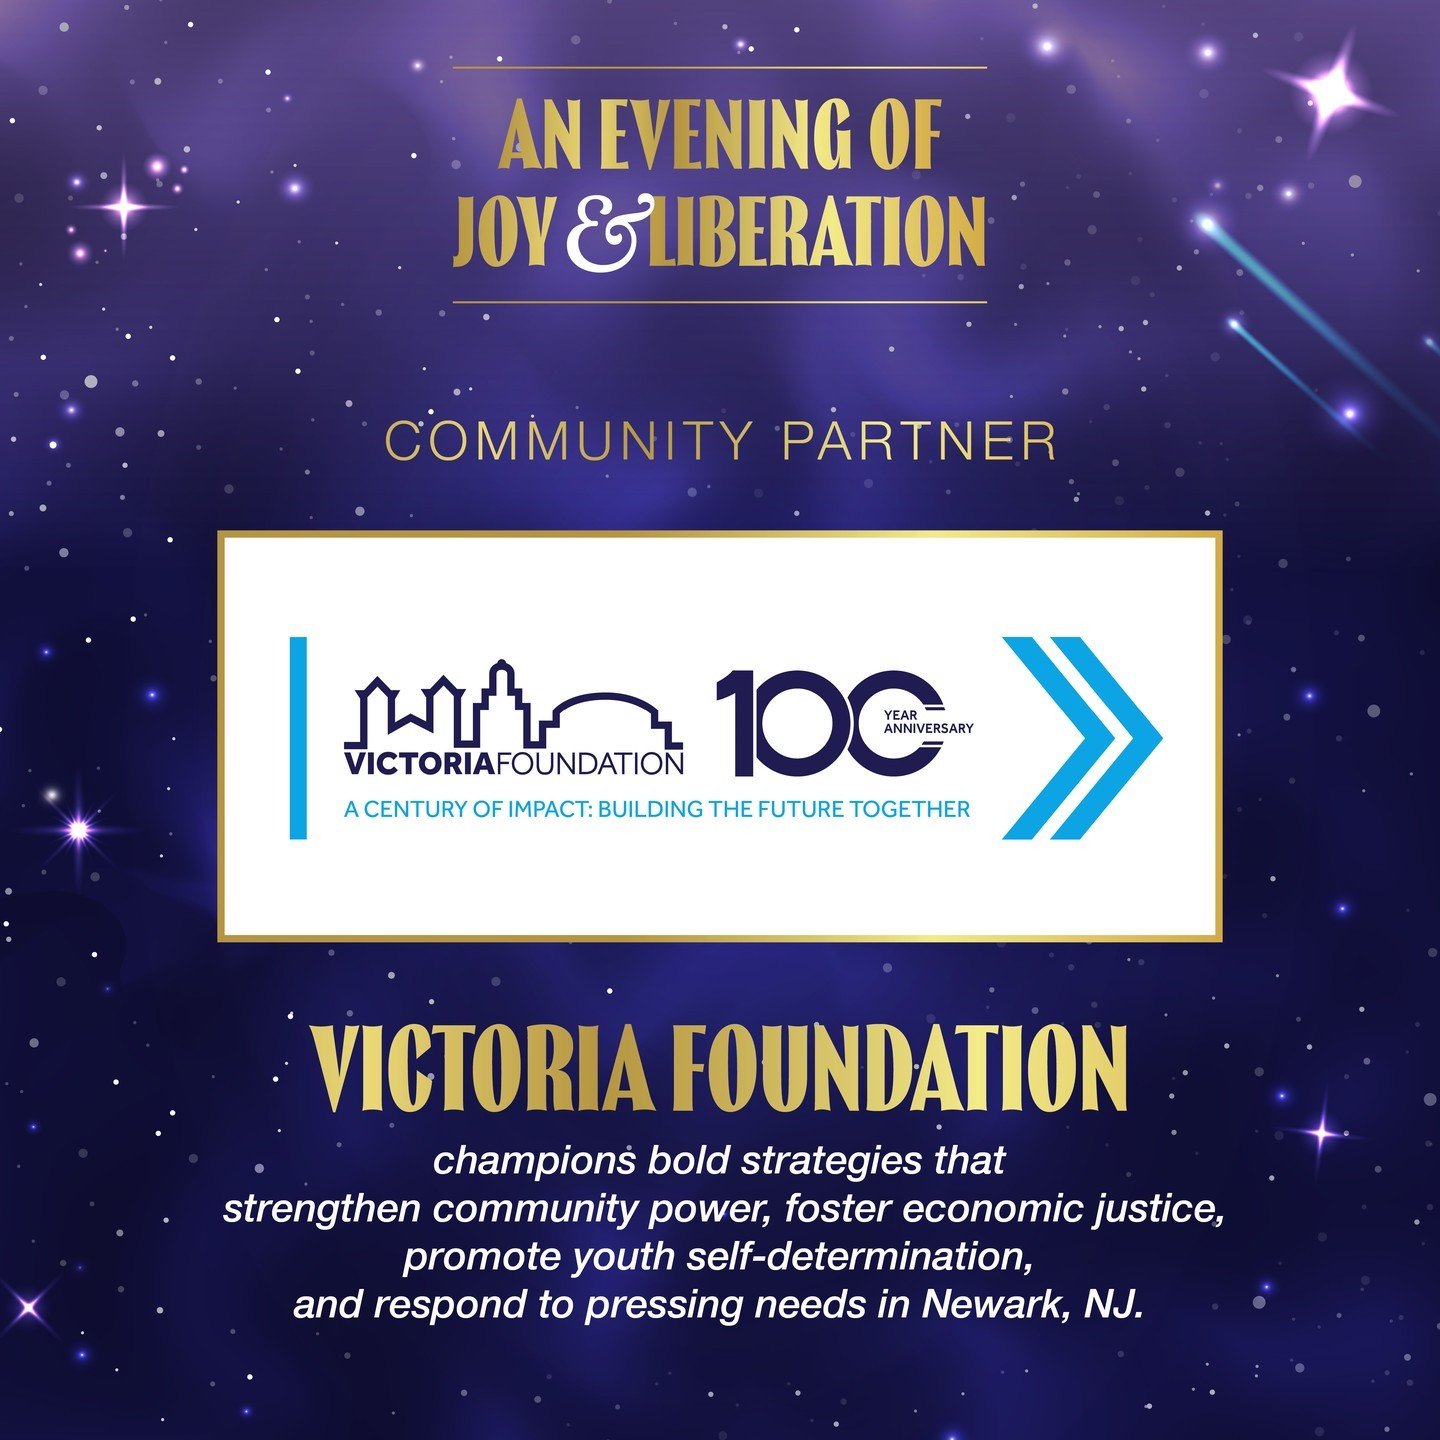 We are so excited to announce our very first recipient of our new Community Partner Award for this year&rsquo;s Evening of Joy &amp; Liberation &ndash; Victoria Foundation ✨💫

⭐ VICTORIA FOUNDATION - Champions bold strategies that strengthen communi